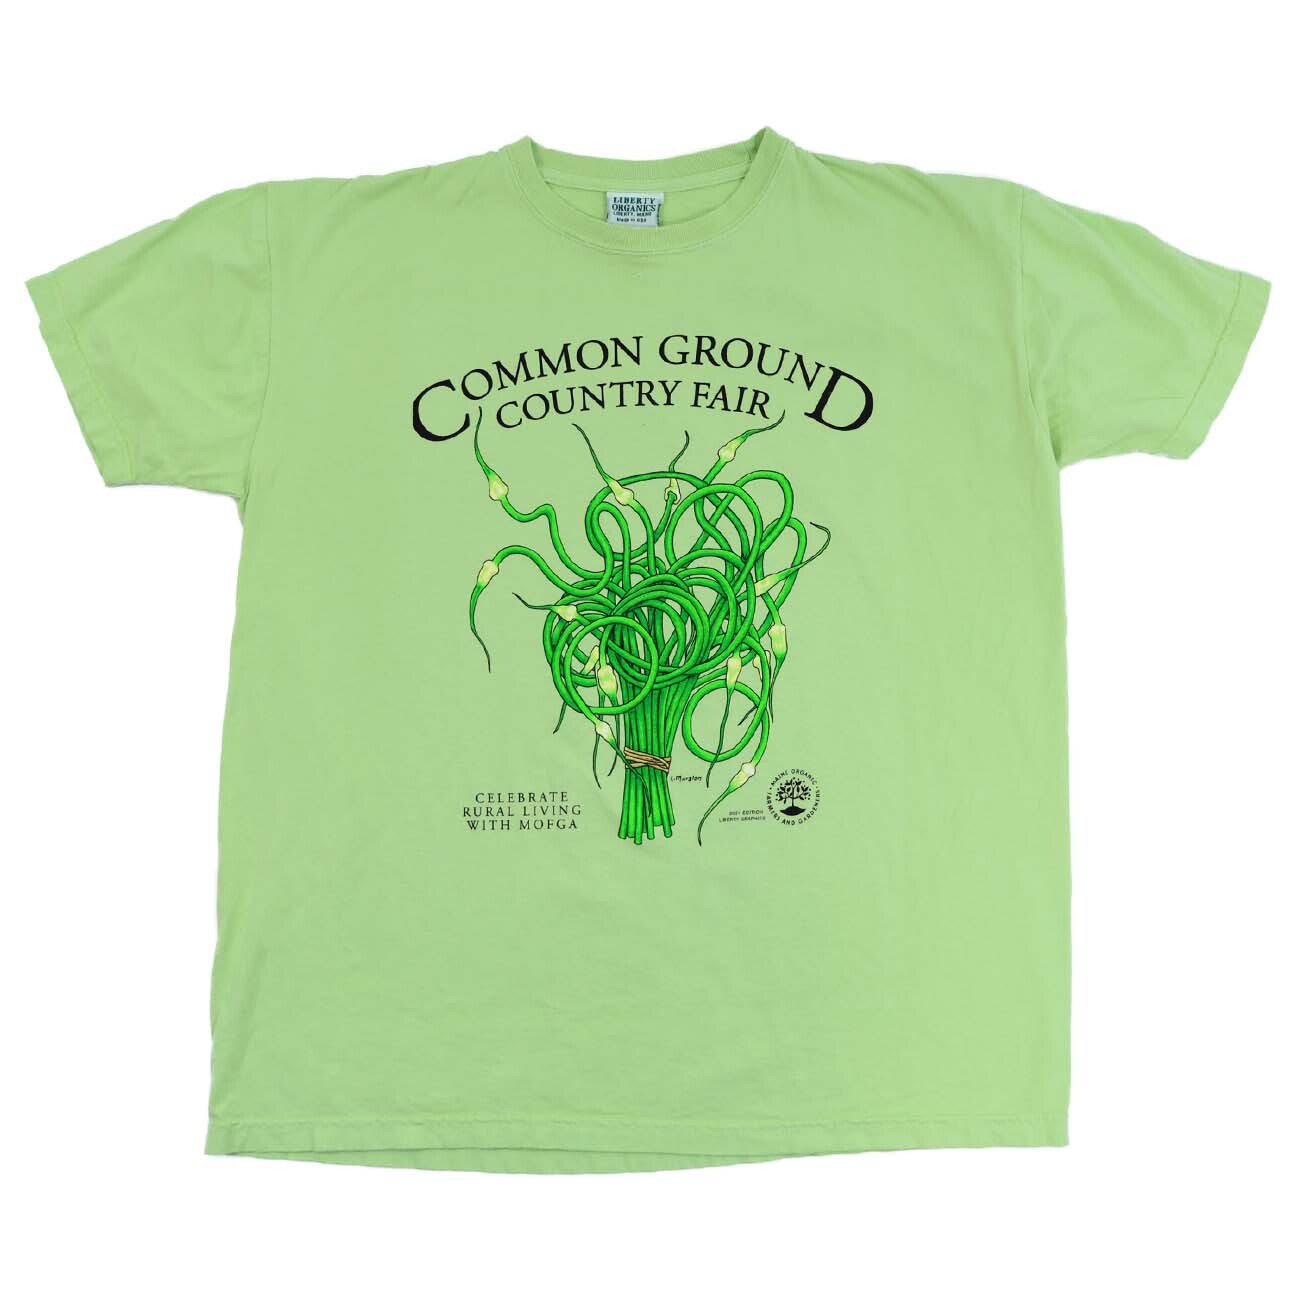 A light green shirt with artwork in the center depicting a cluster of green and cream garlic scapes bound with brown twine at the bottom. Black text around art reads “Common Ground Country Fair” and  “Celebrate Rural Living with MOFGA”. A black MOFGA logo is in the bottom right corner. 